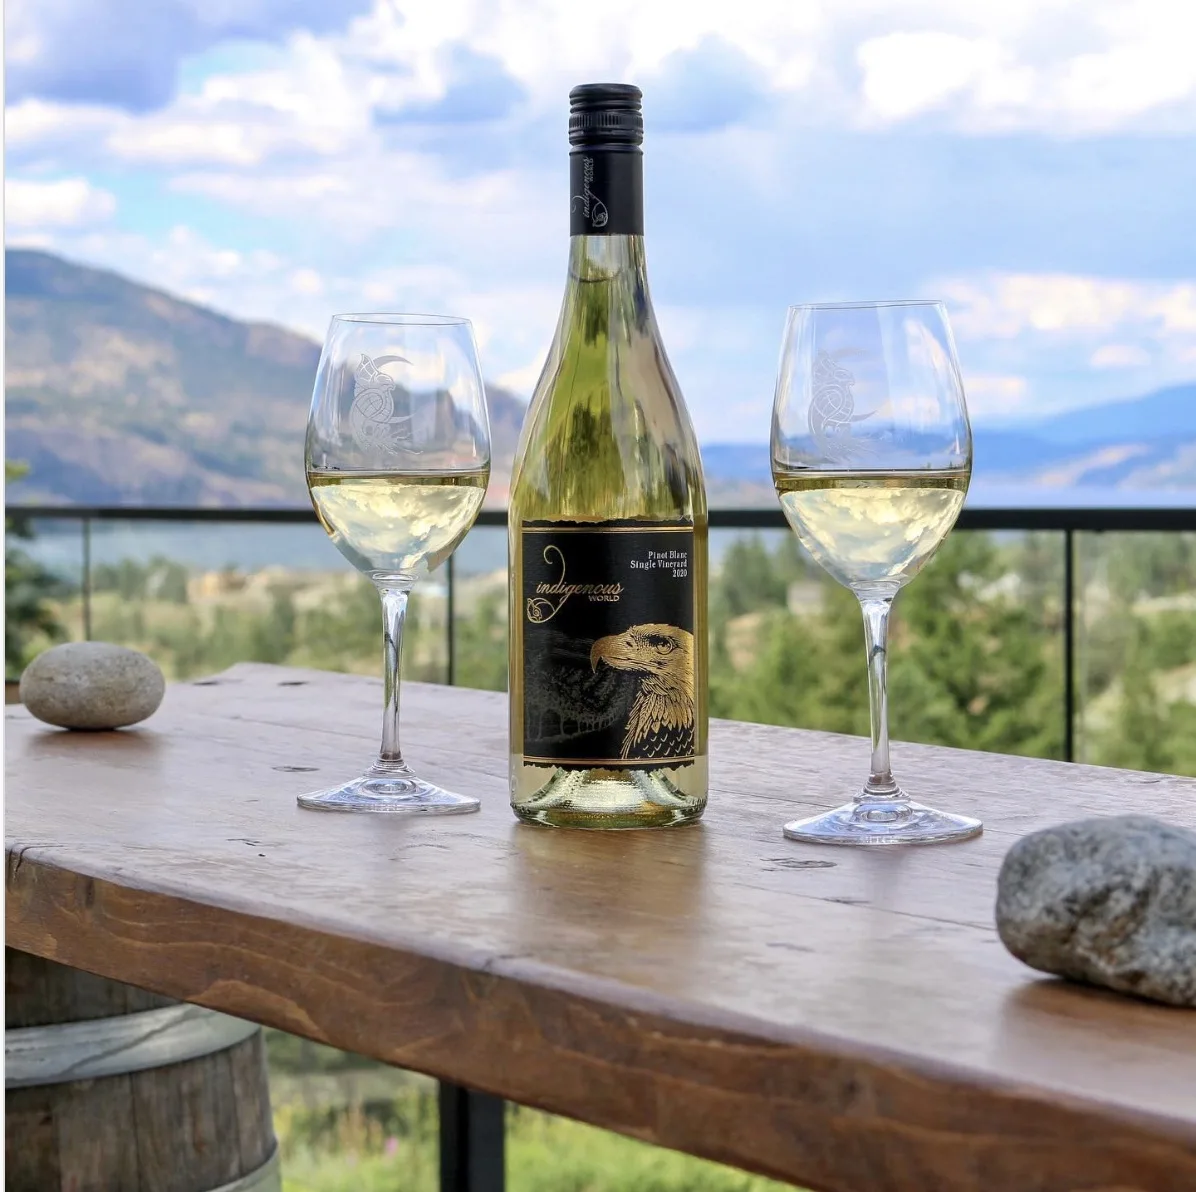 If you're heading to the Okanagan soon and planning on spending time in Kelowna, you don't want to miss this guide to the best wineries in Kelowna! From organic wineries to wineries with the best view, this guide will help you plan your visit to Kelowna’s incredible wine region. Pictured here: Indigenous World Winery